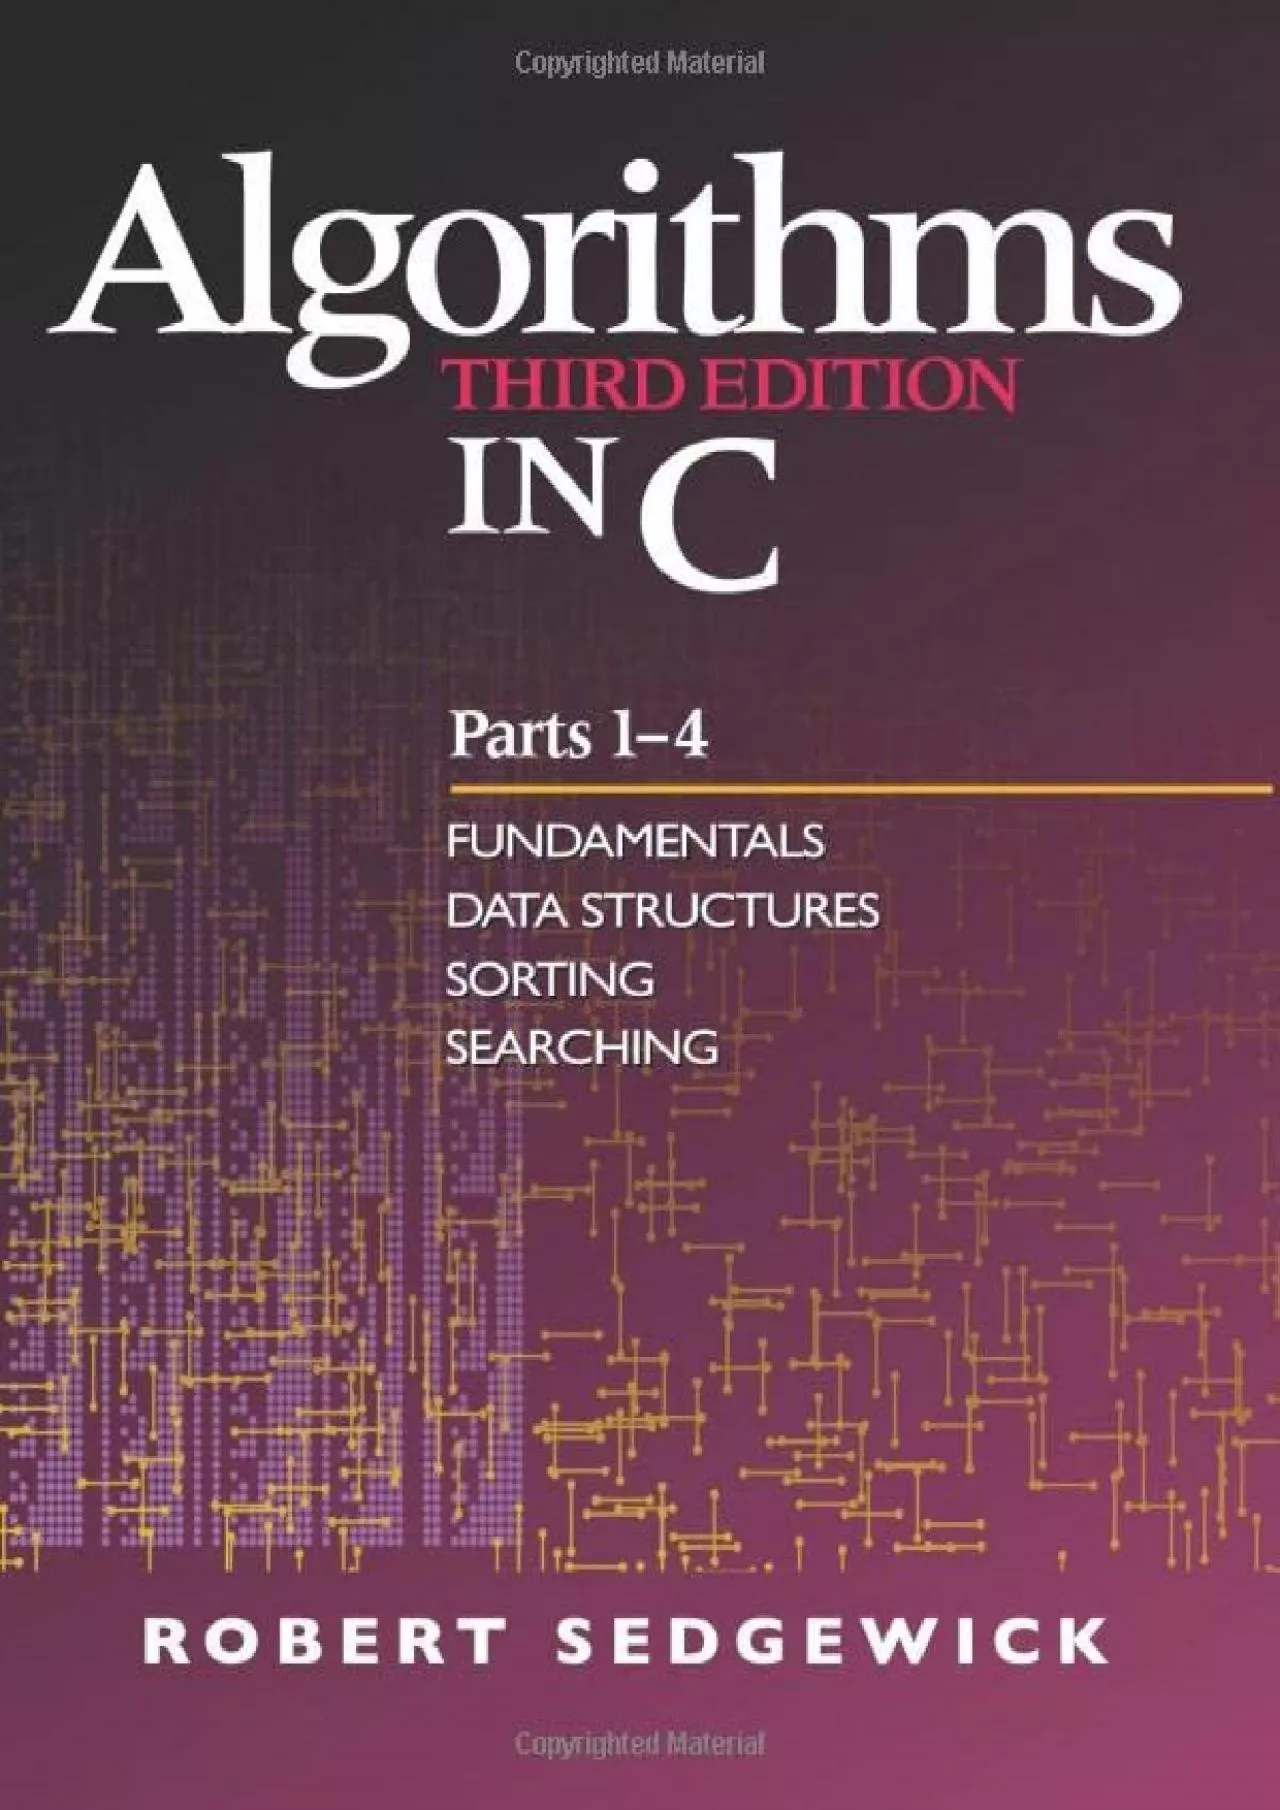 [BEST]-Algorithms in C, Parts 1-4: Fundamentals, Data Structures, Sorting, Searching